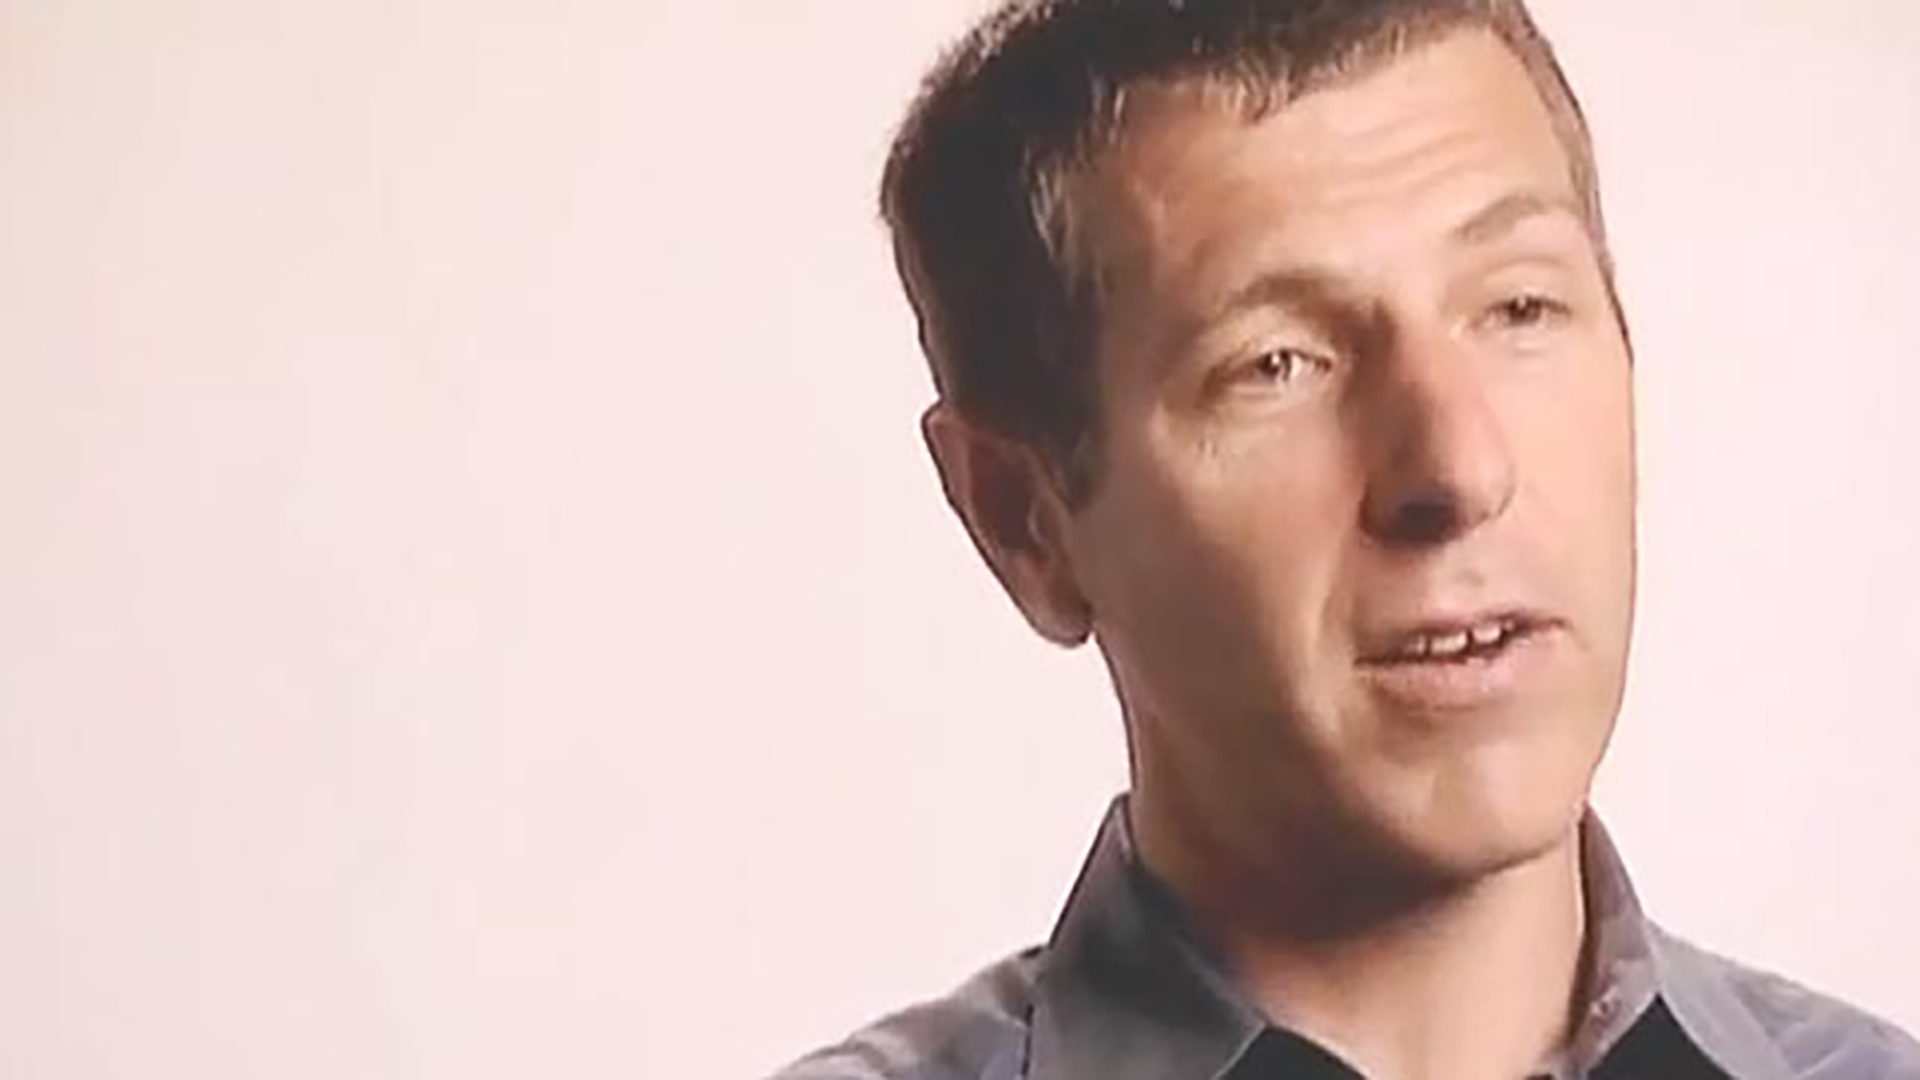 A man wearing a grey collared shirt is interviewed against a light background.